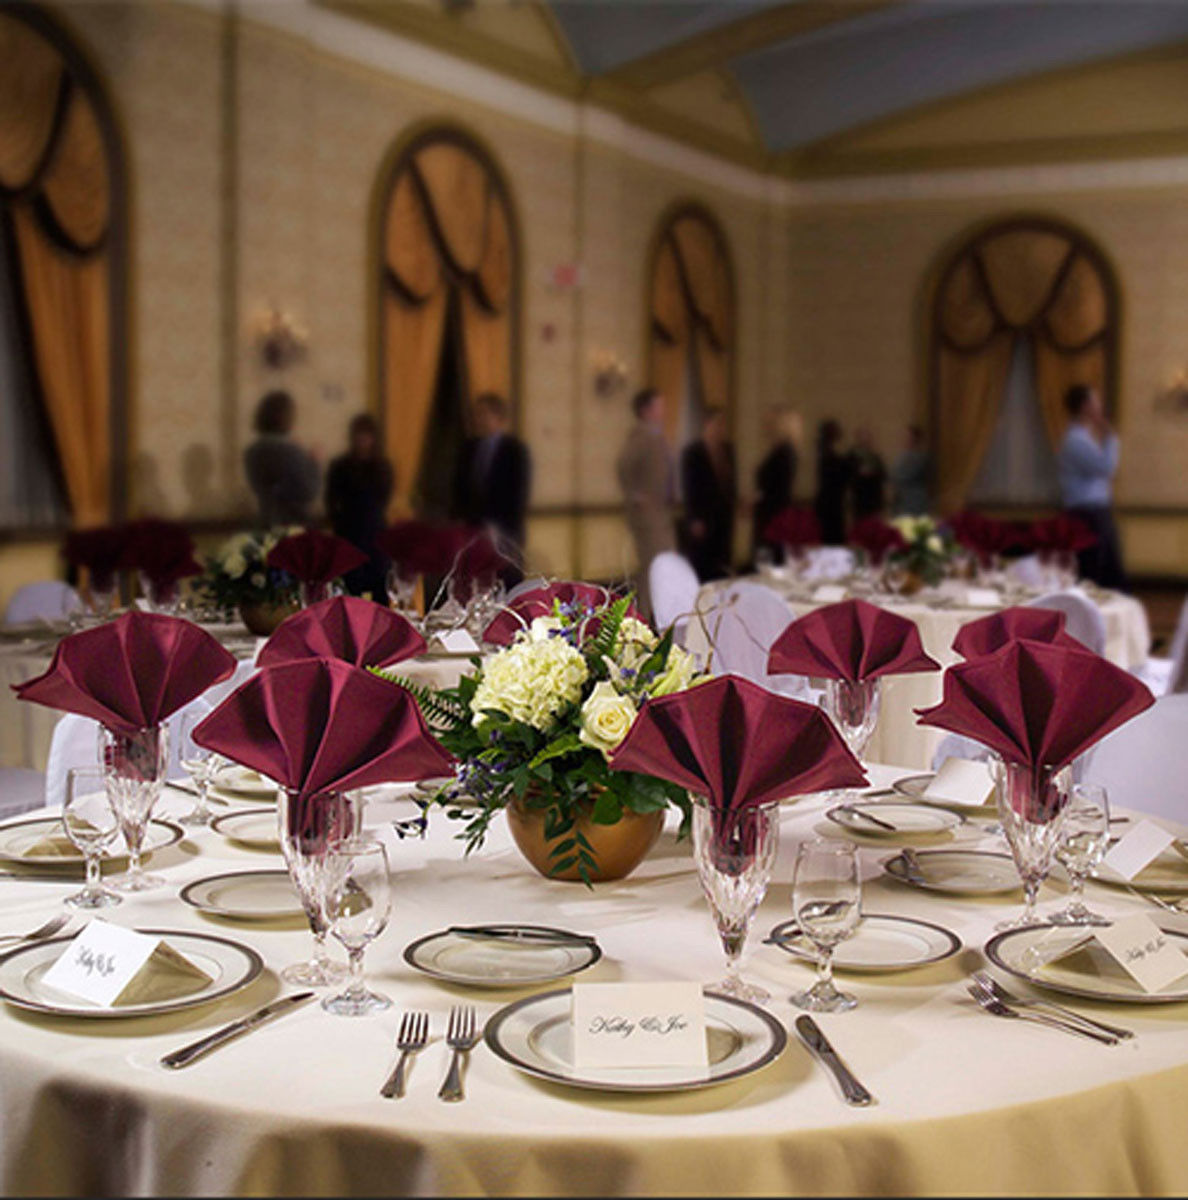 What advantages does the 120 inch round tablecloth offer when using Signature Plus Round Table Linens?